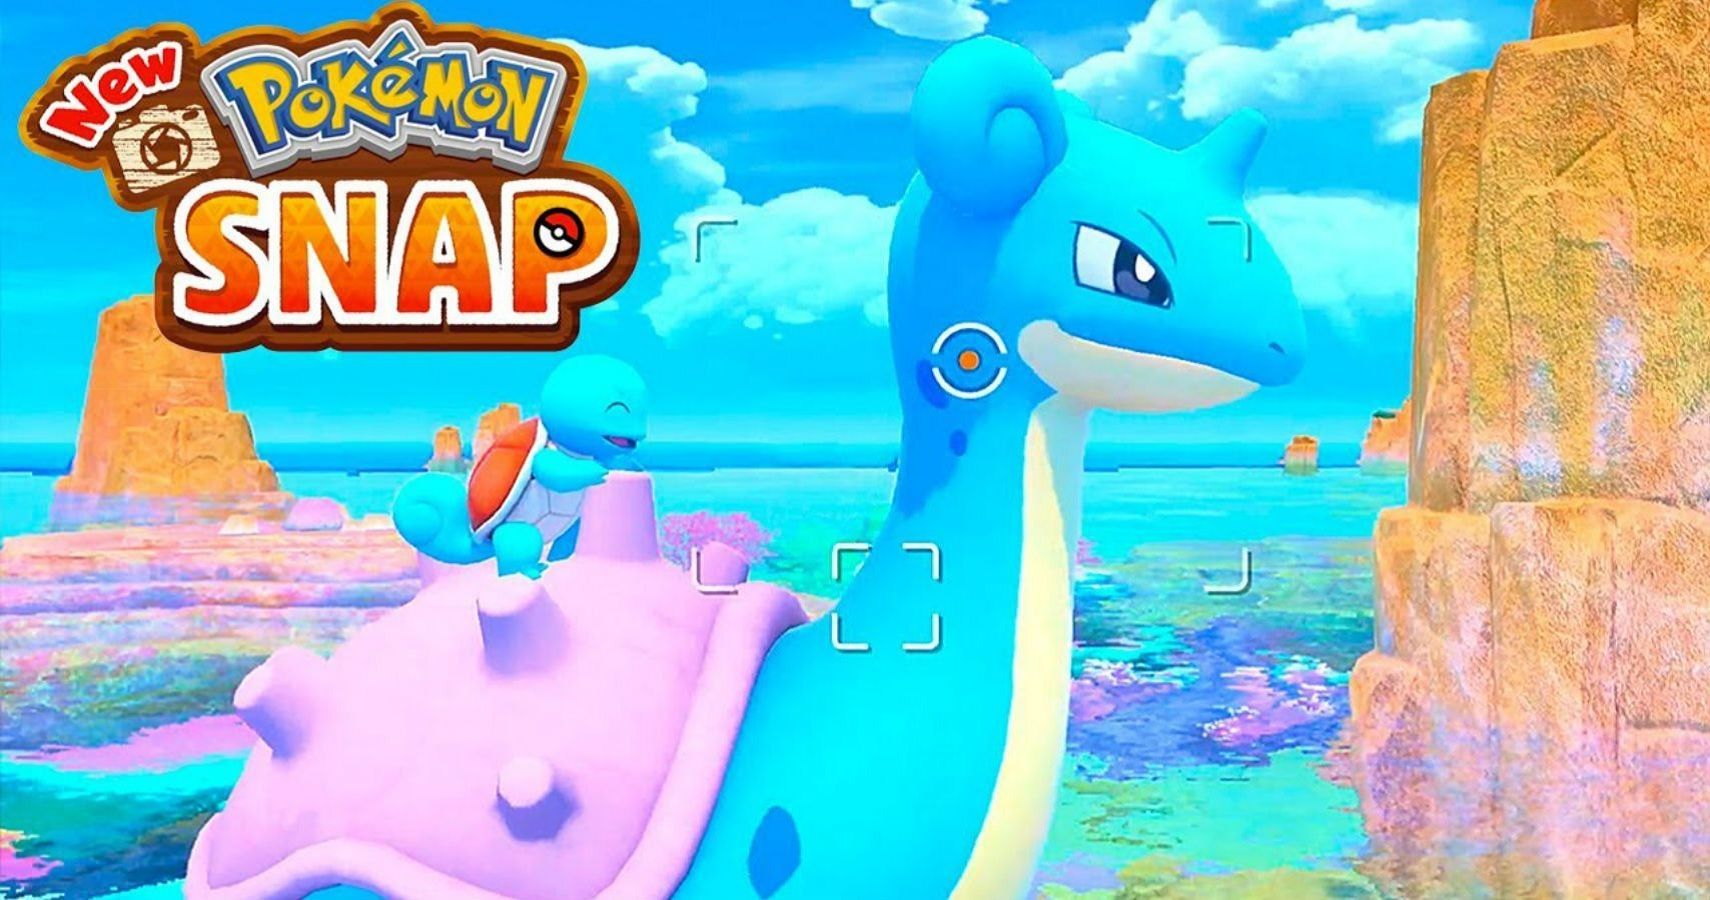 New Pokemon Snap 5 Things From The Original Game We Want To See 5 Mistakes To Avoid